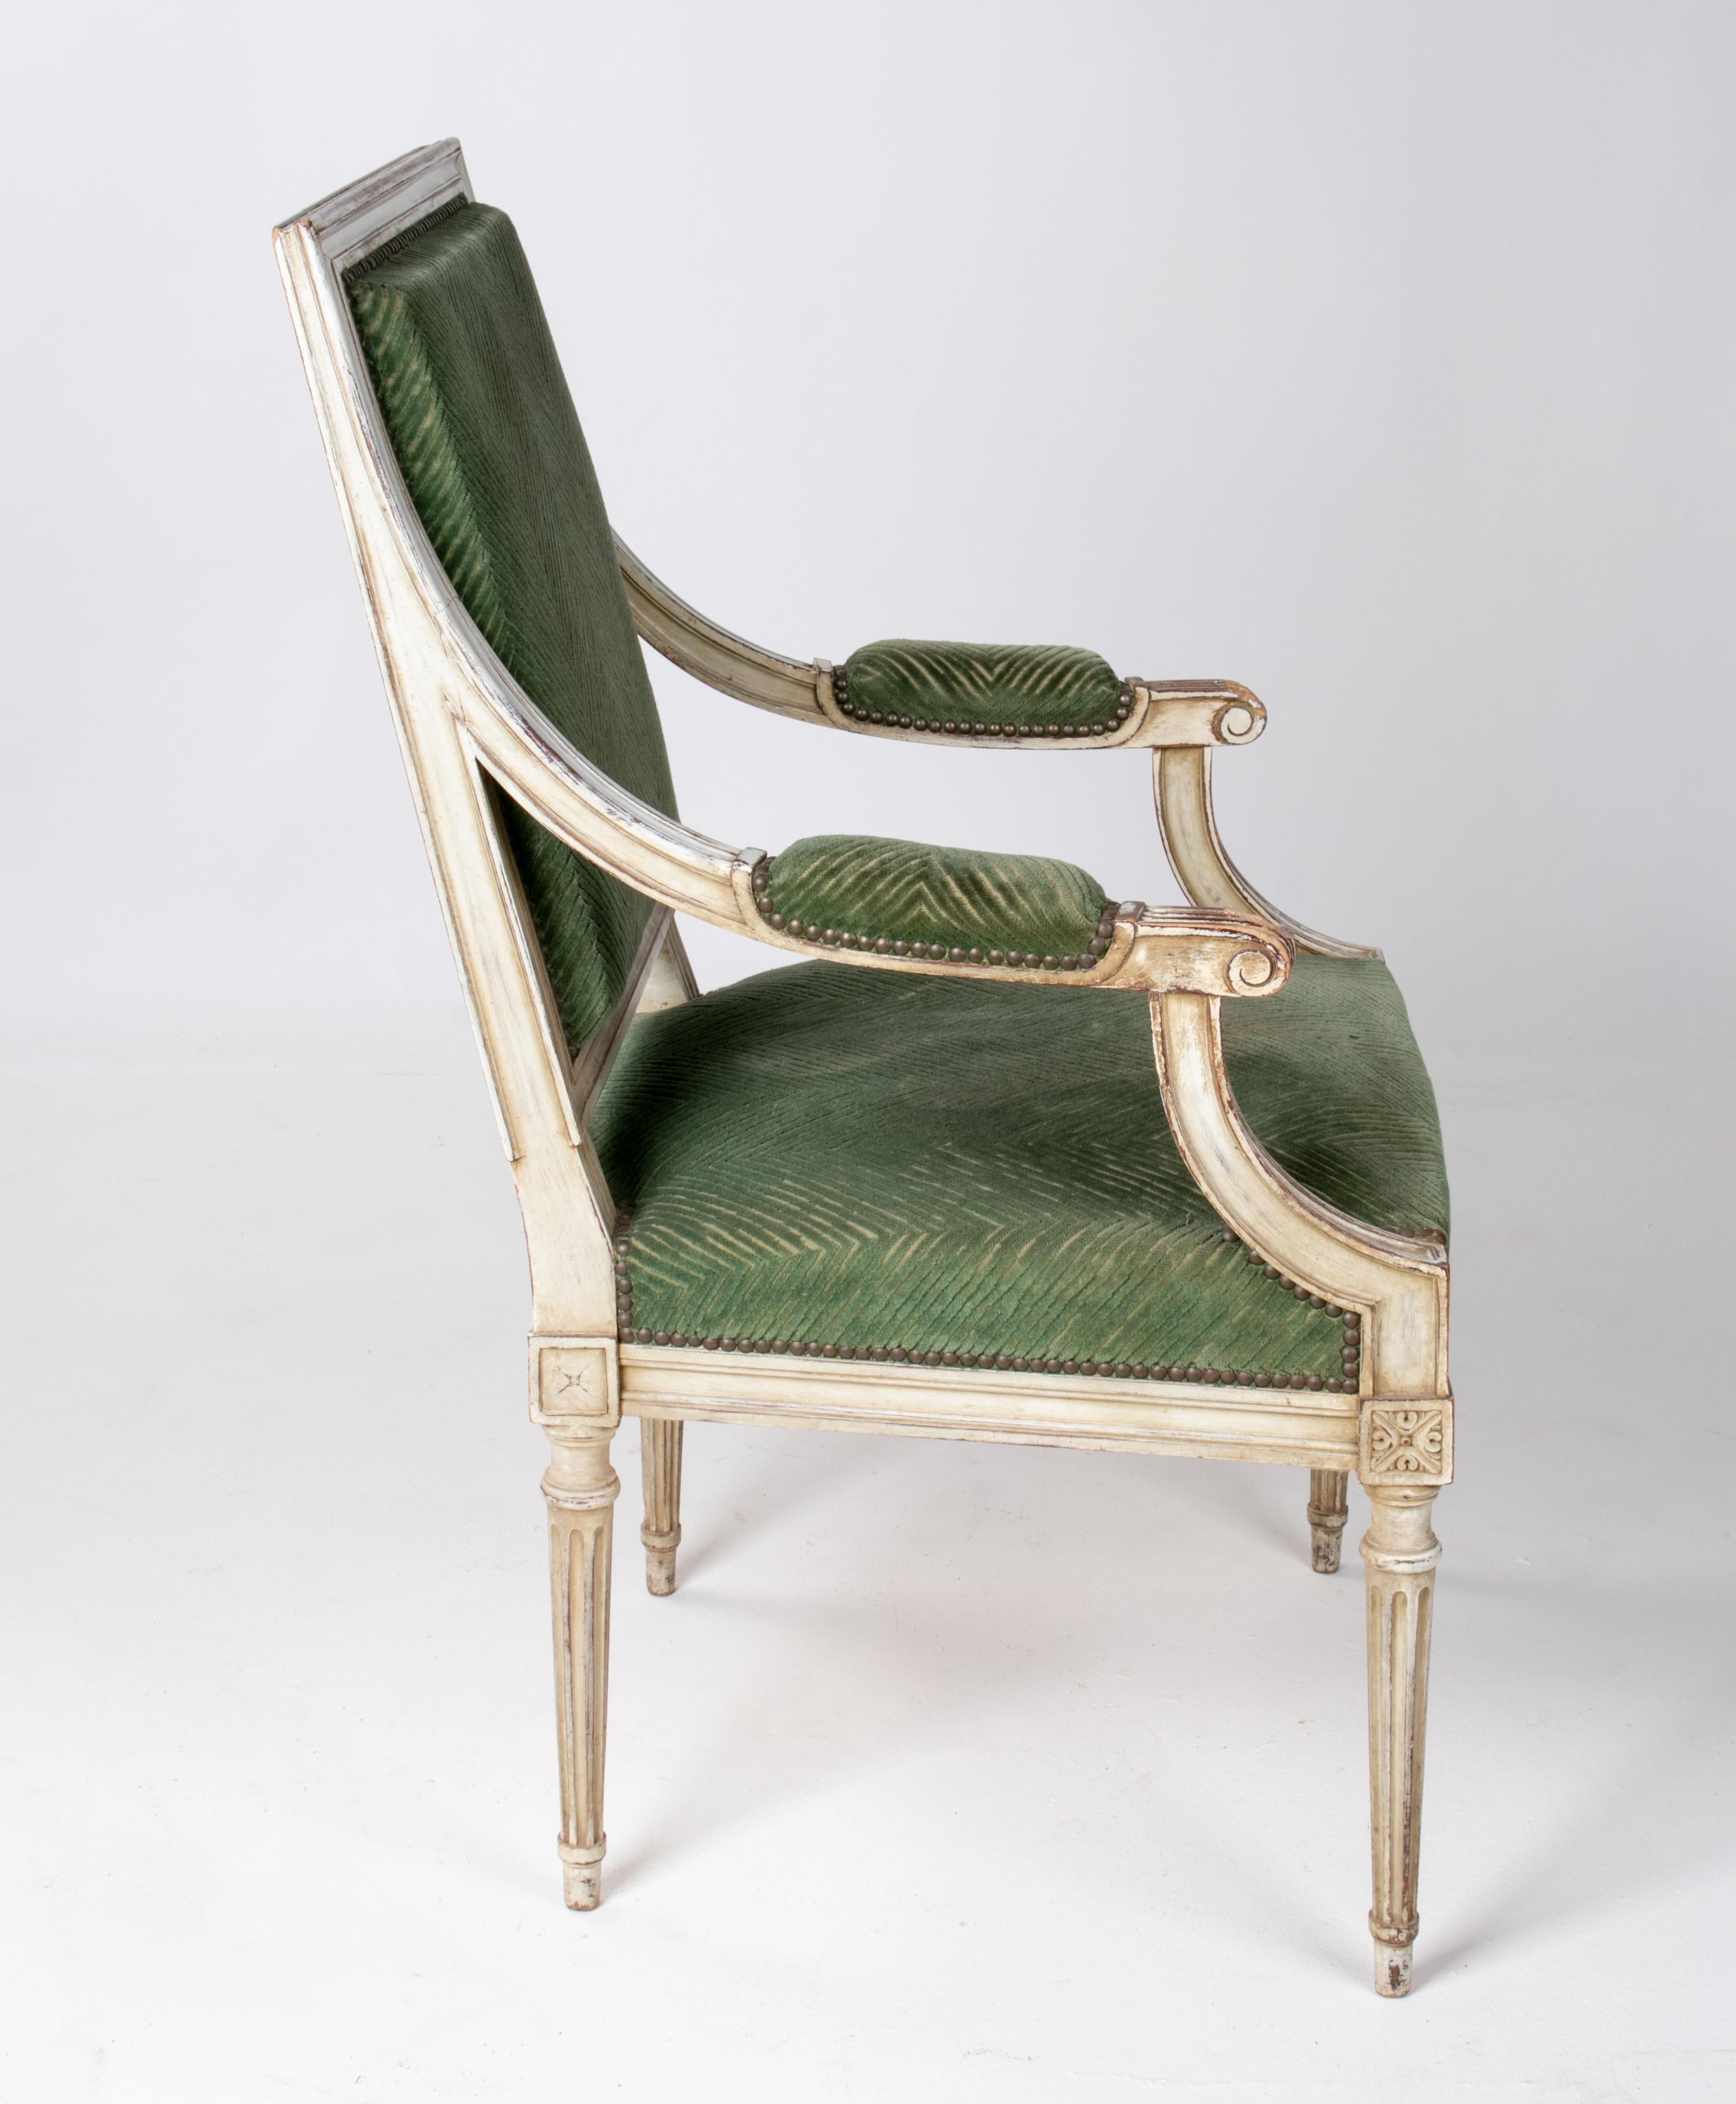 1870s French Louis XVI Style White Lacquered and Velvet Upholstered Armchair For Sale 2